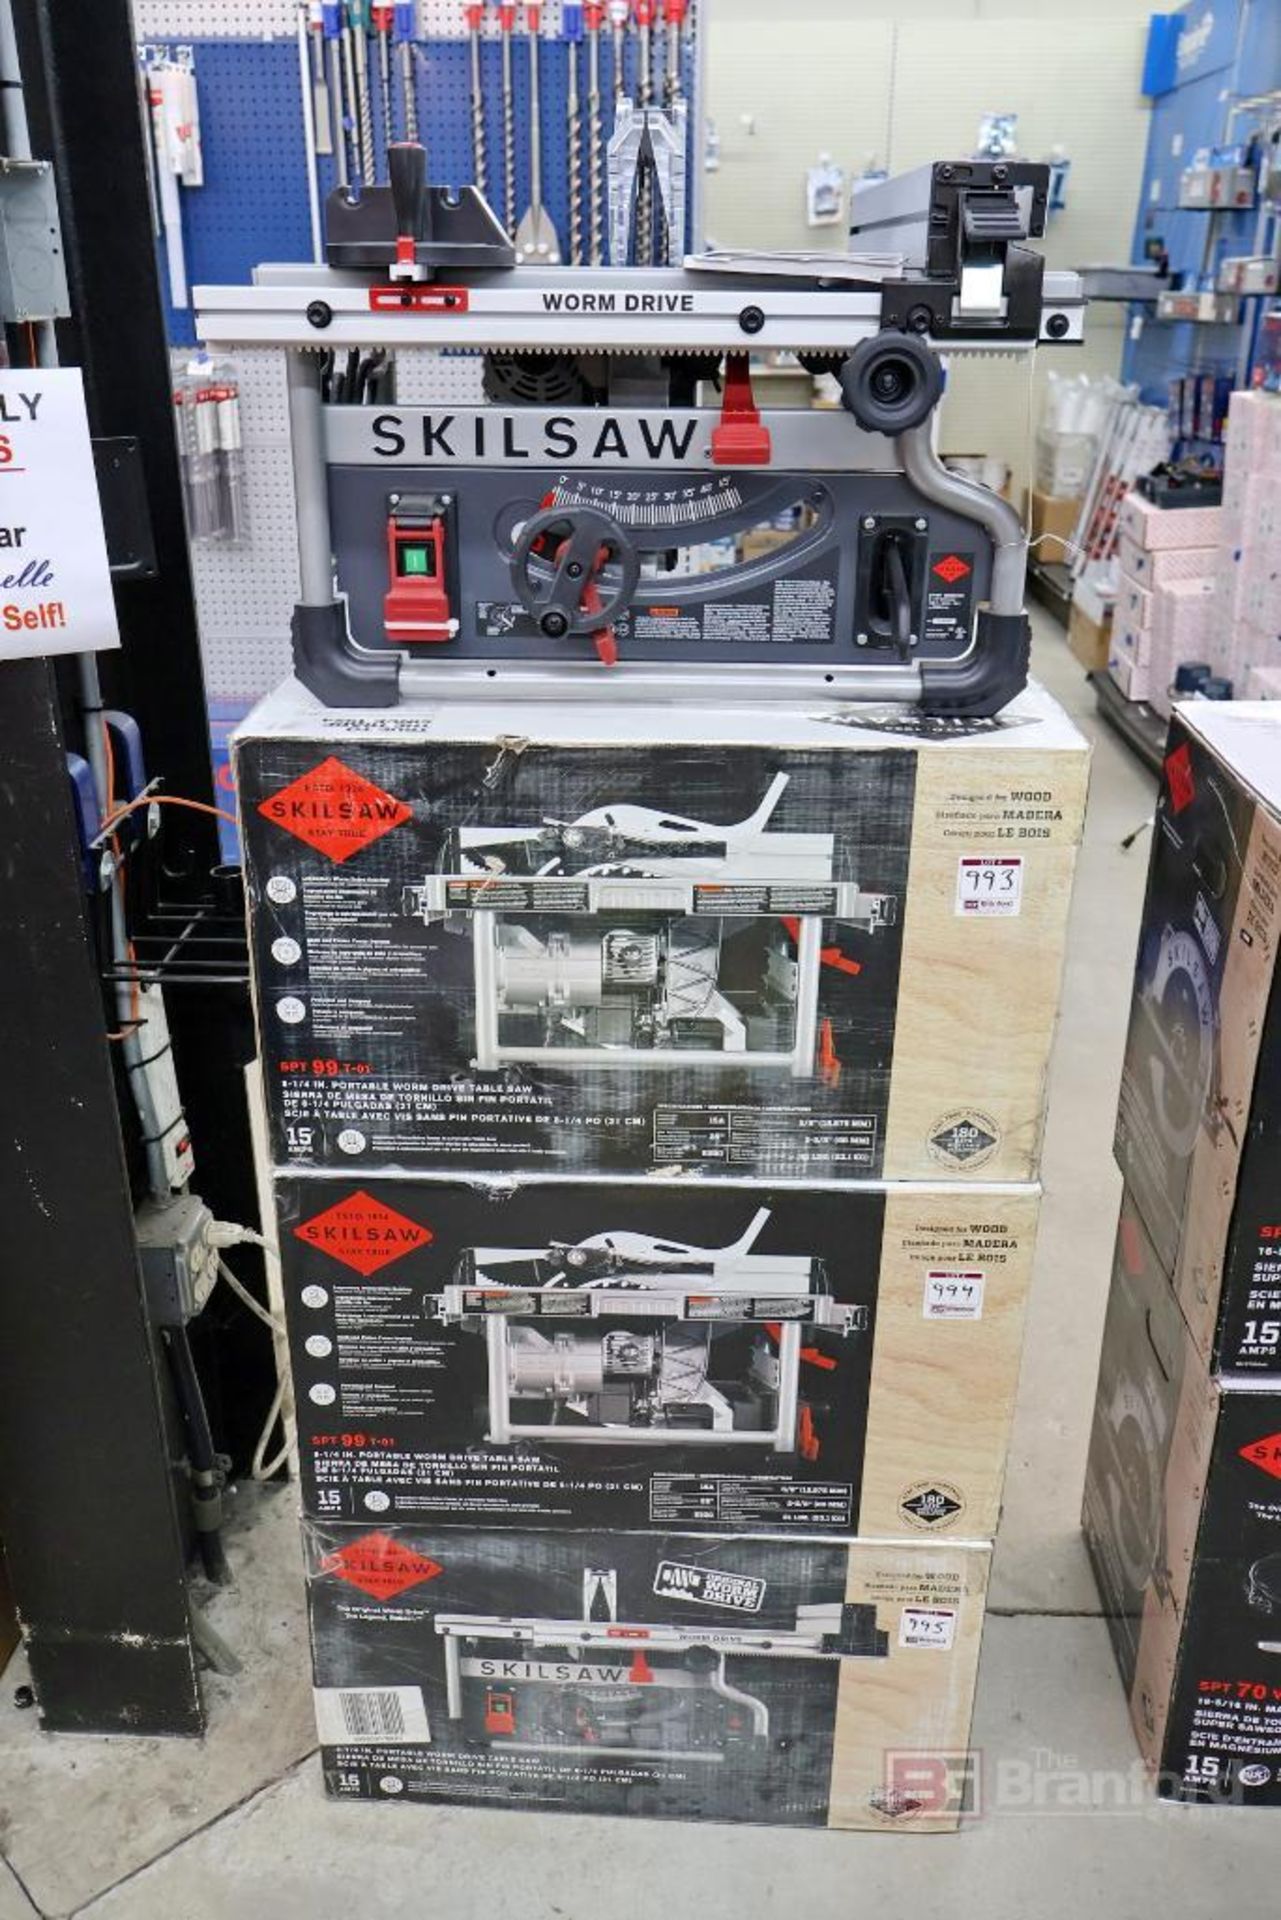 SKILSAW SPT 99 T-01 Portable Worm Drive Table Saw - Image 5 of 10